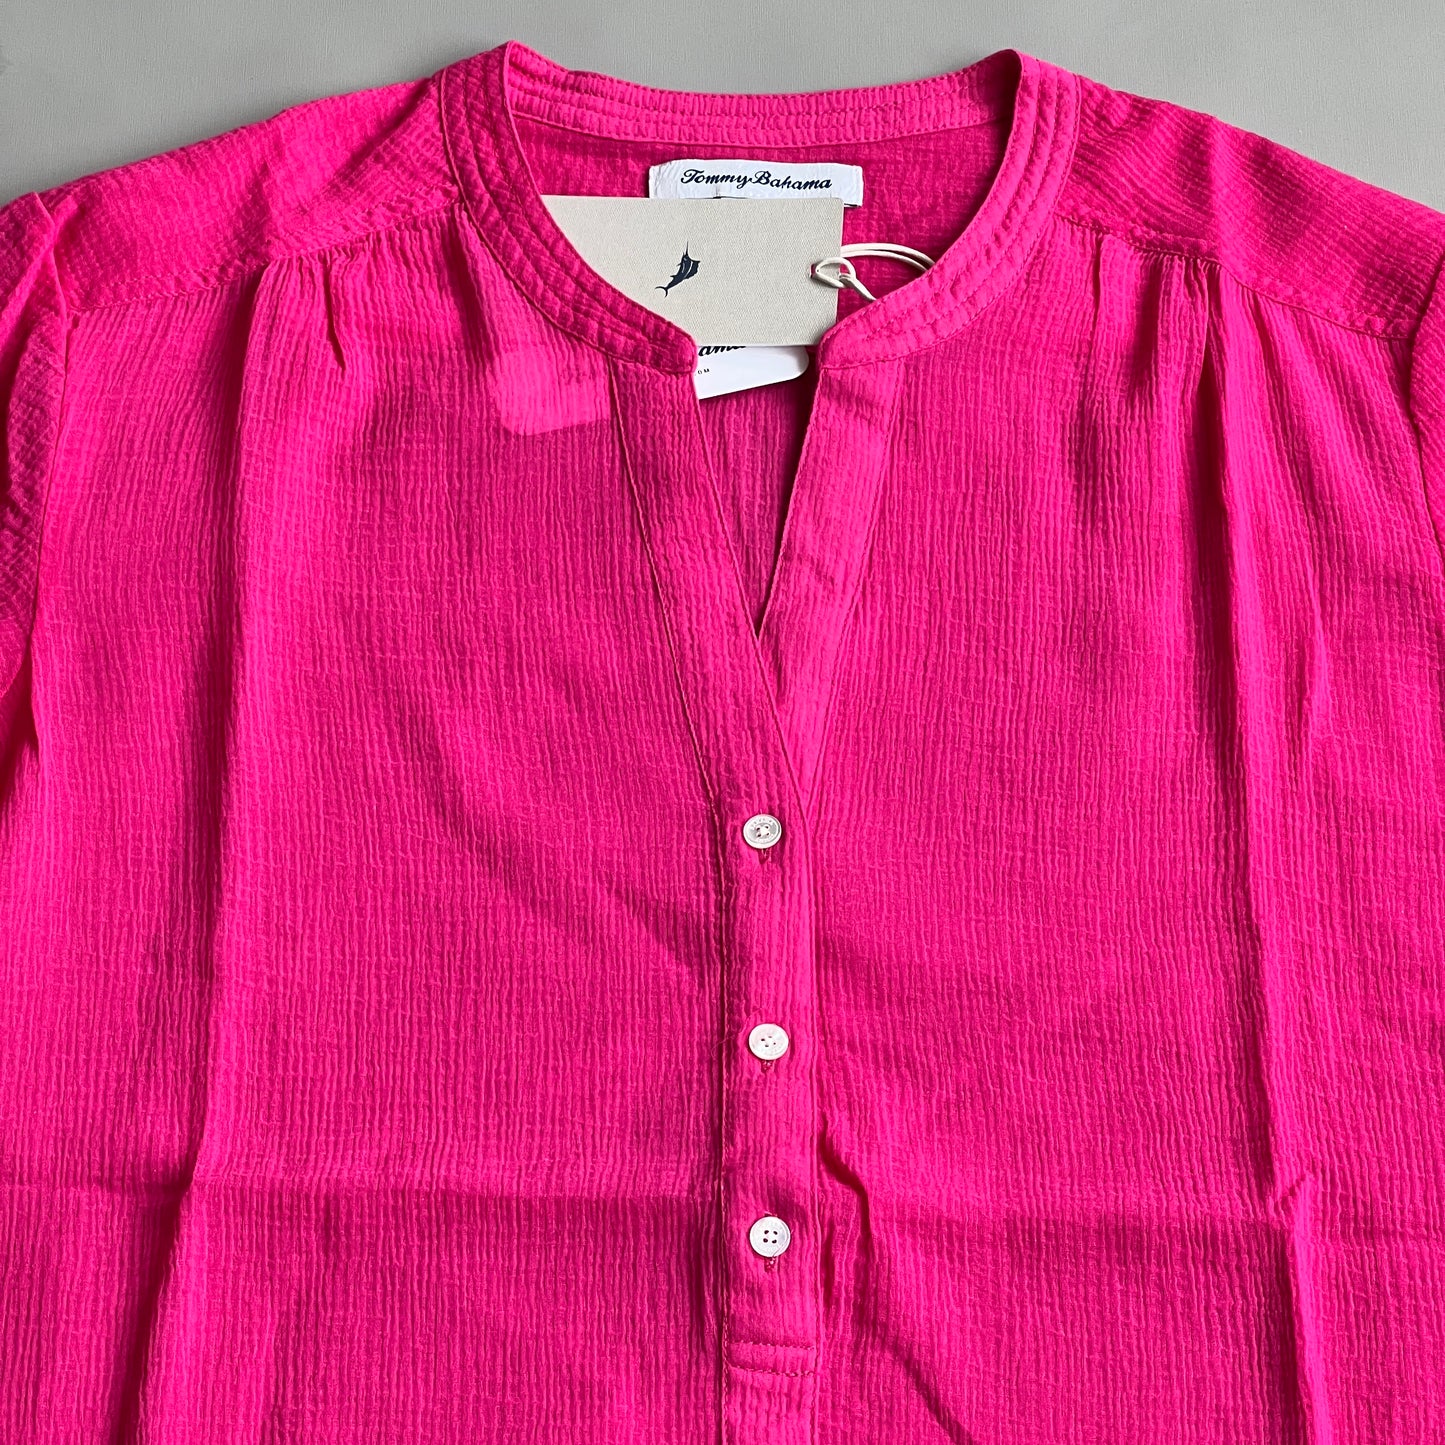 TOMMY BAHAMA Women's Coastview Gauze Top 3/4 Sleeve Rose Bed Size M (New)